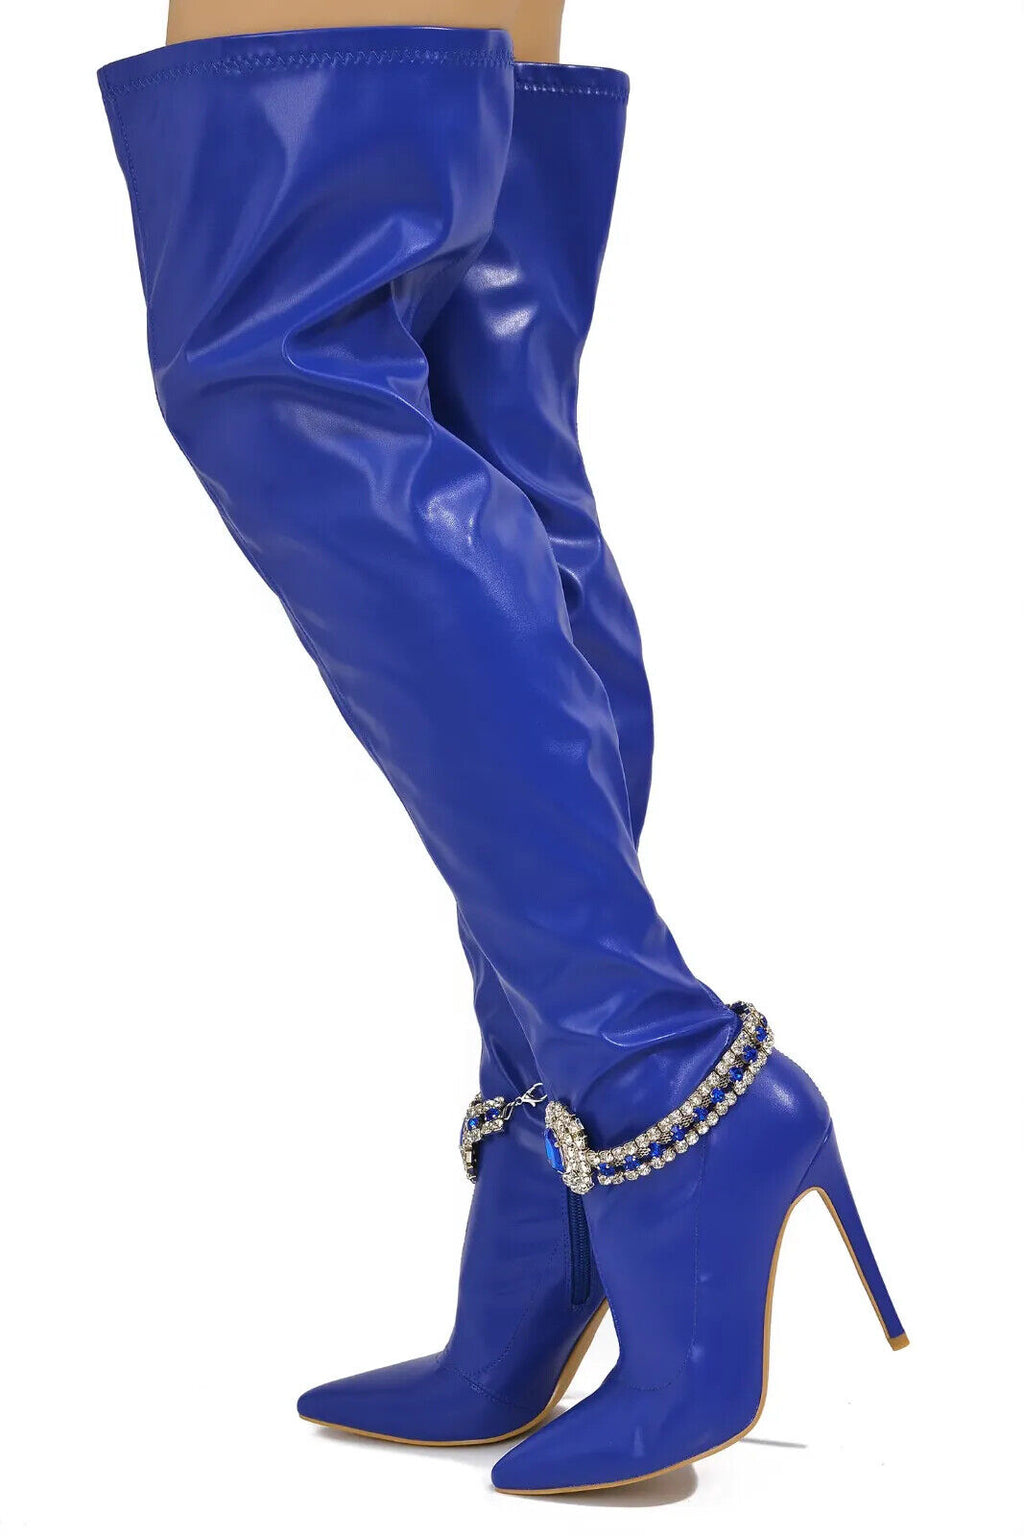 Lawless Bold Blue Stretch Leatherette Rhinestone Ankle Bracelet Thigh High Boots - Totally Wicked Footwear